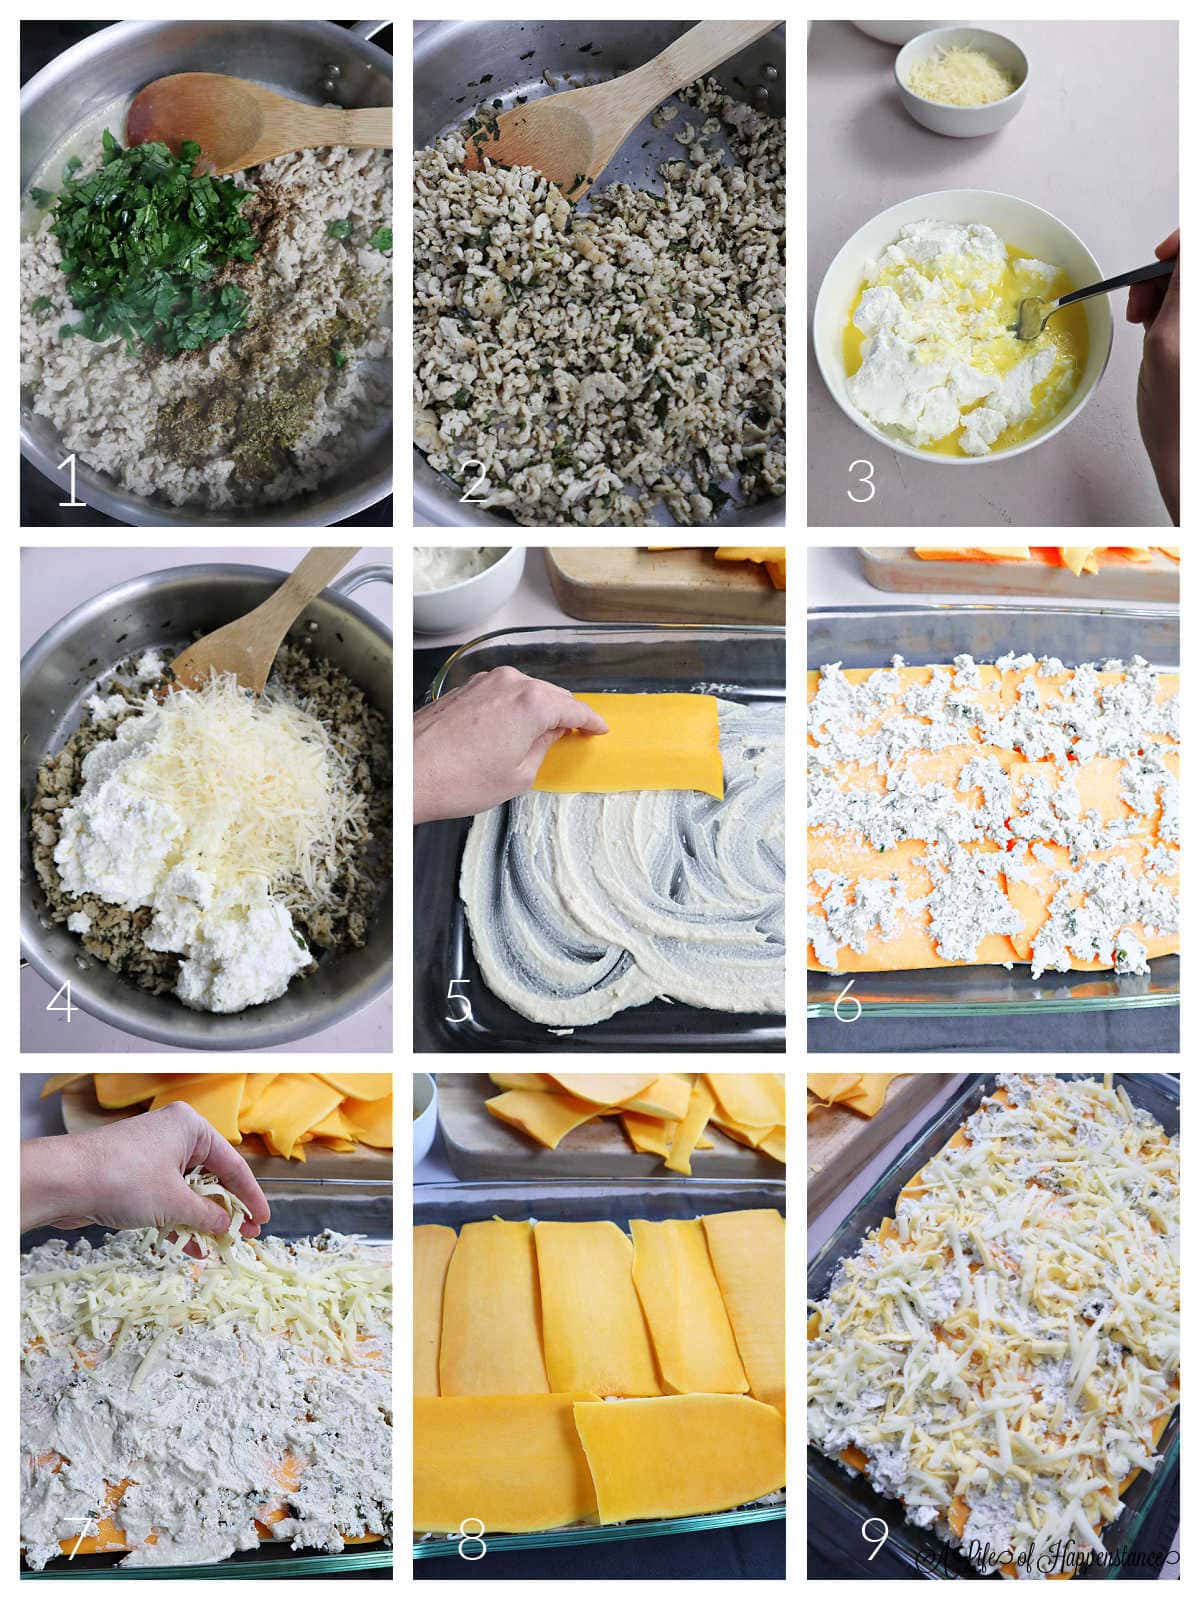 A nine photo collage showing how to make and assemble the lasagna.